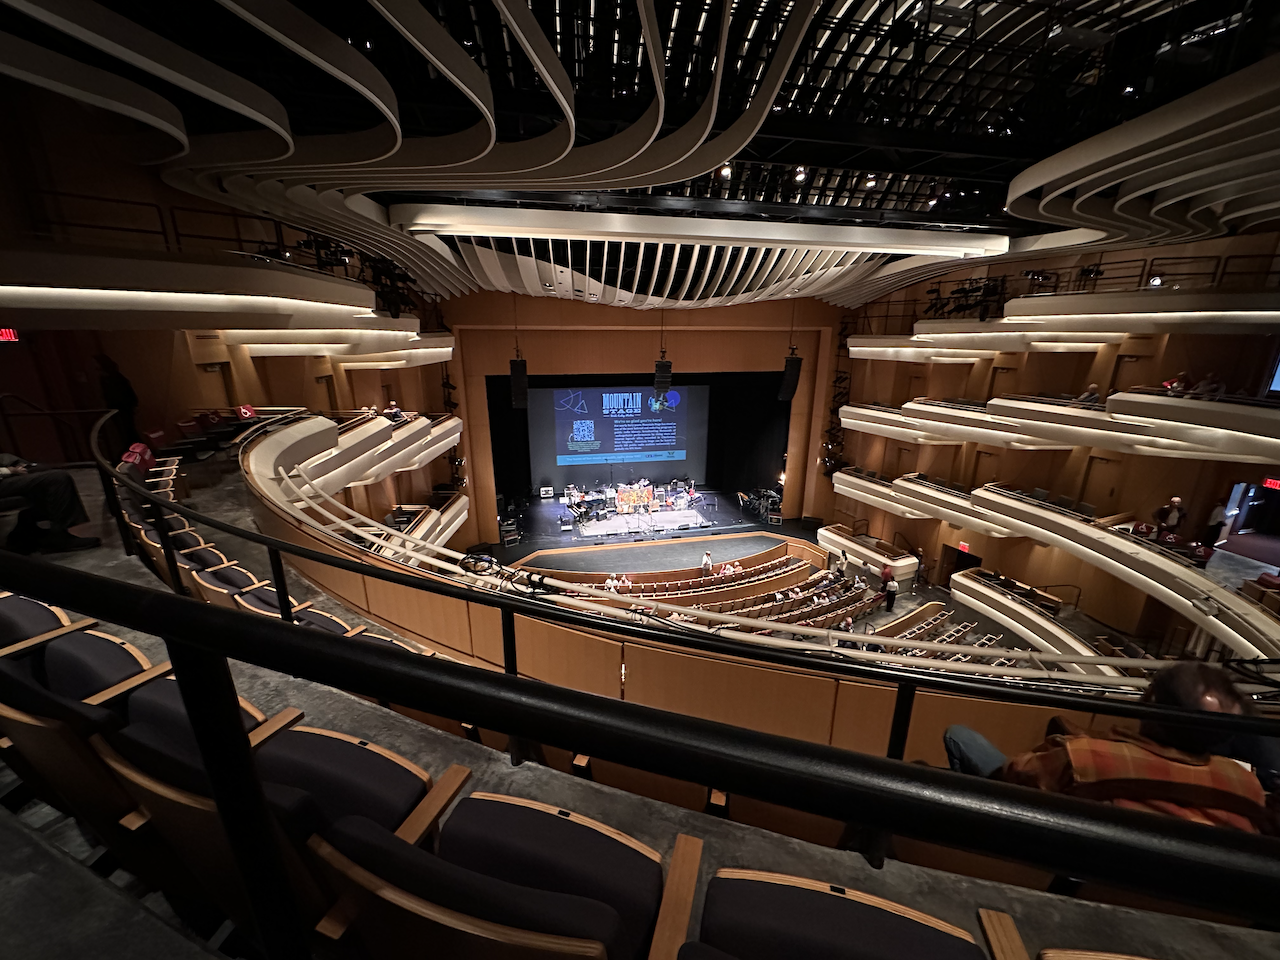 A mostly empty, modern auditorium with musical instruments set up on the stage. The picture has been taken from the balcony. Small box seats are visible to either side. A screen on stage promotes details of the NPR show Mountain Stage